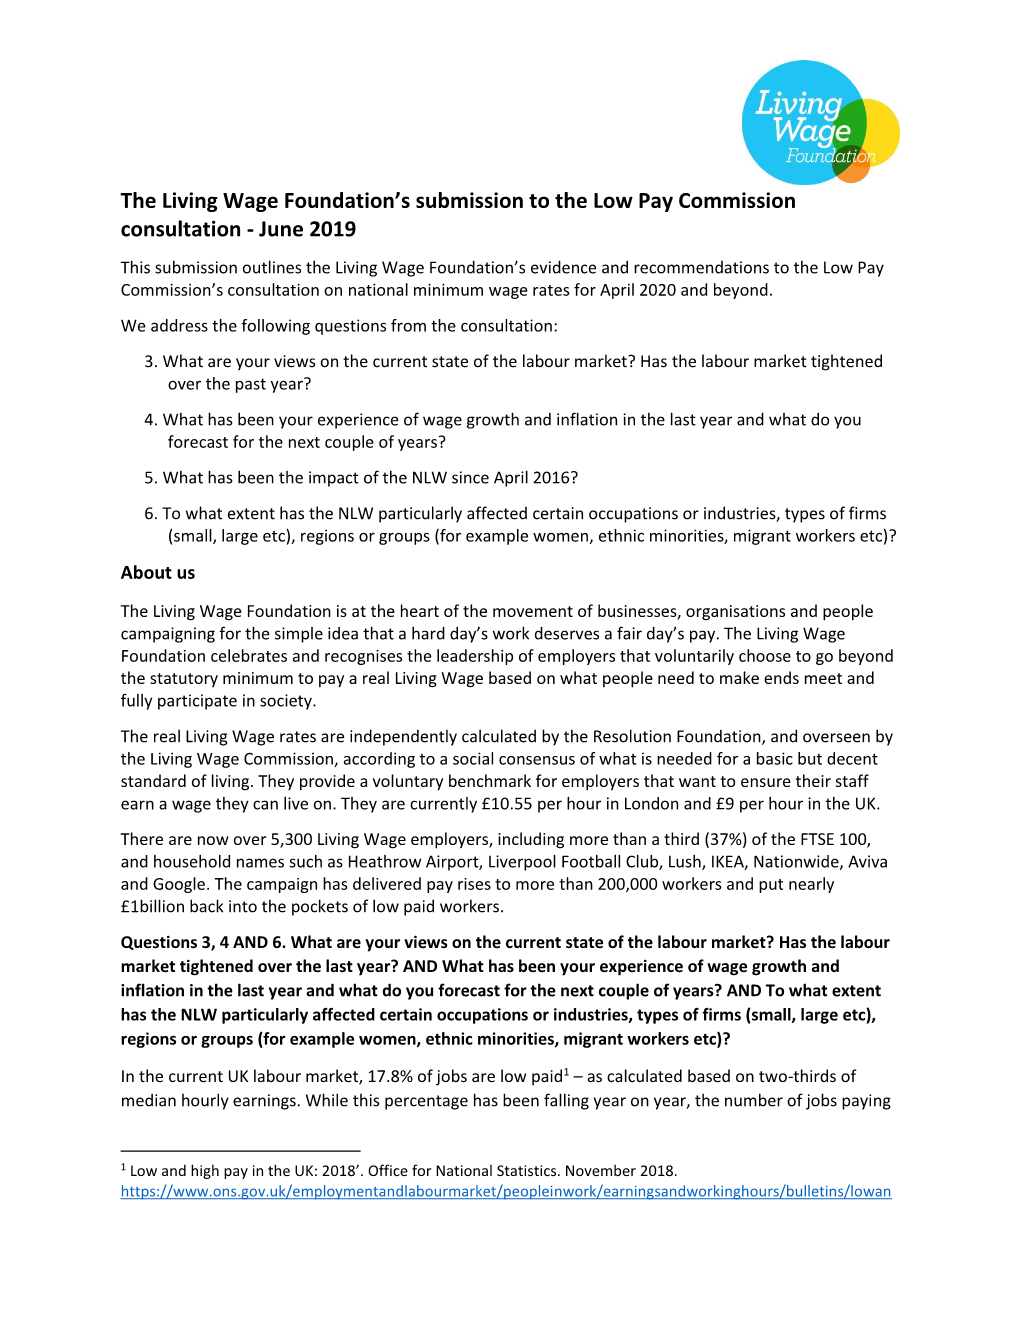 The Living Wage Foundation's Submission to the Low Pay